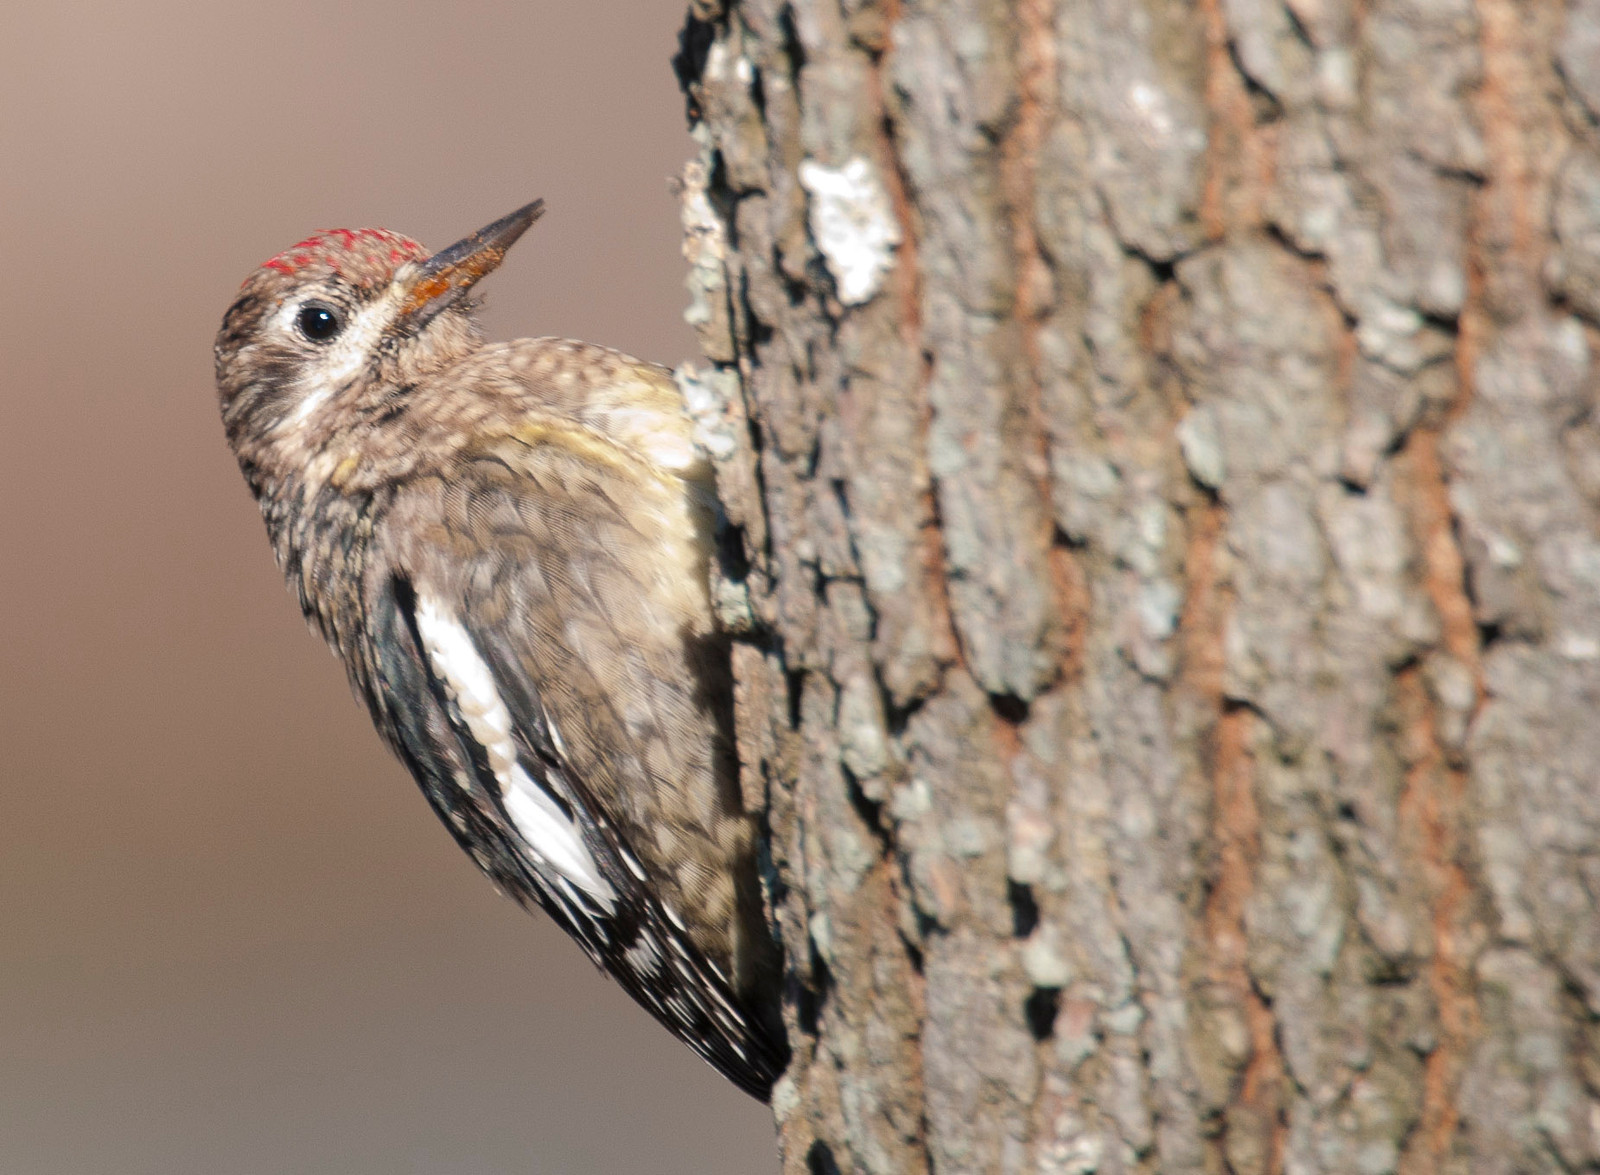 Second-year Yellow-bellied Sapsucker